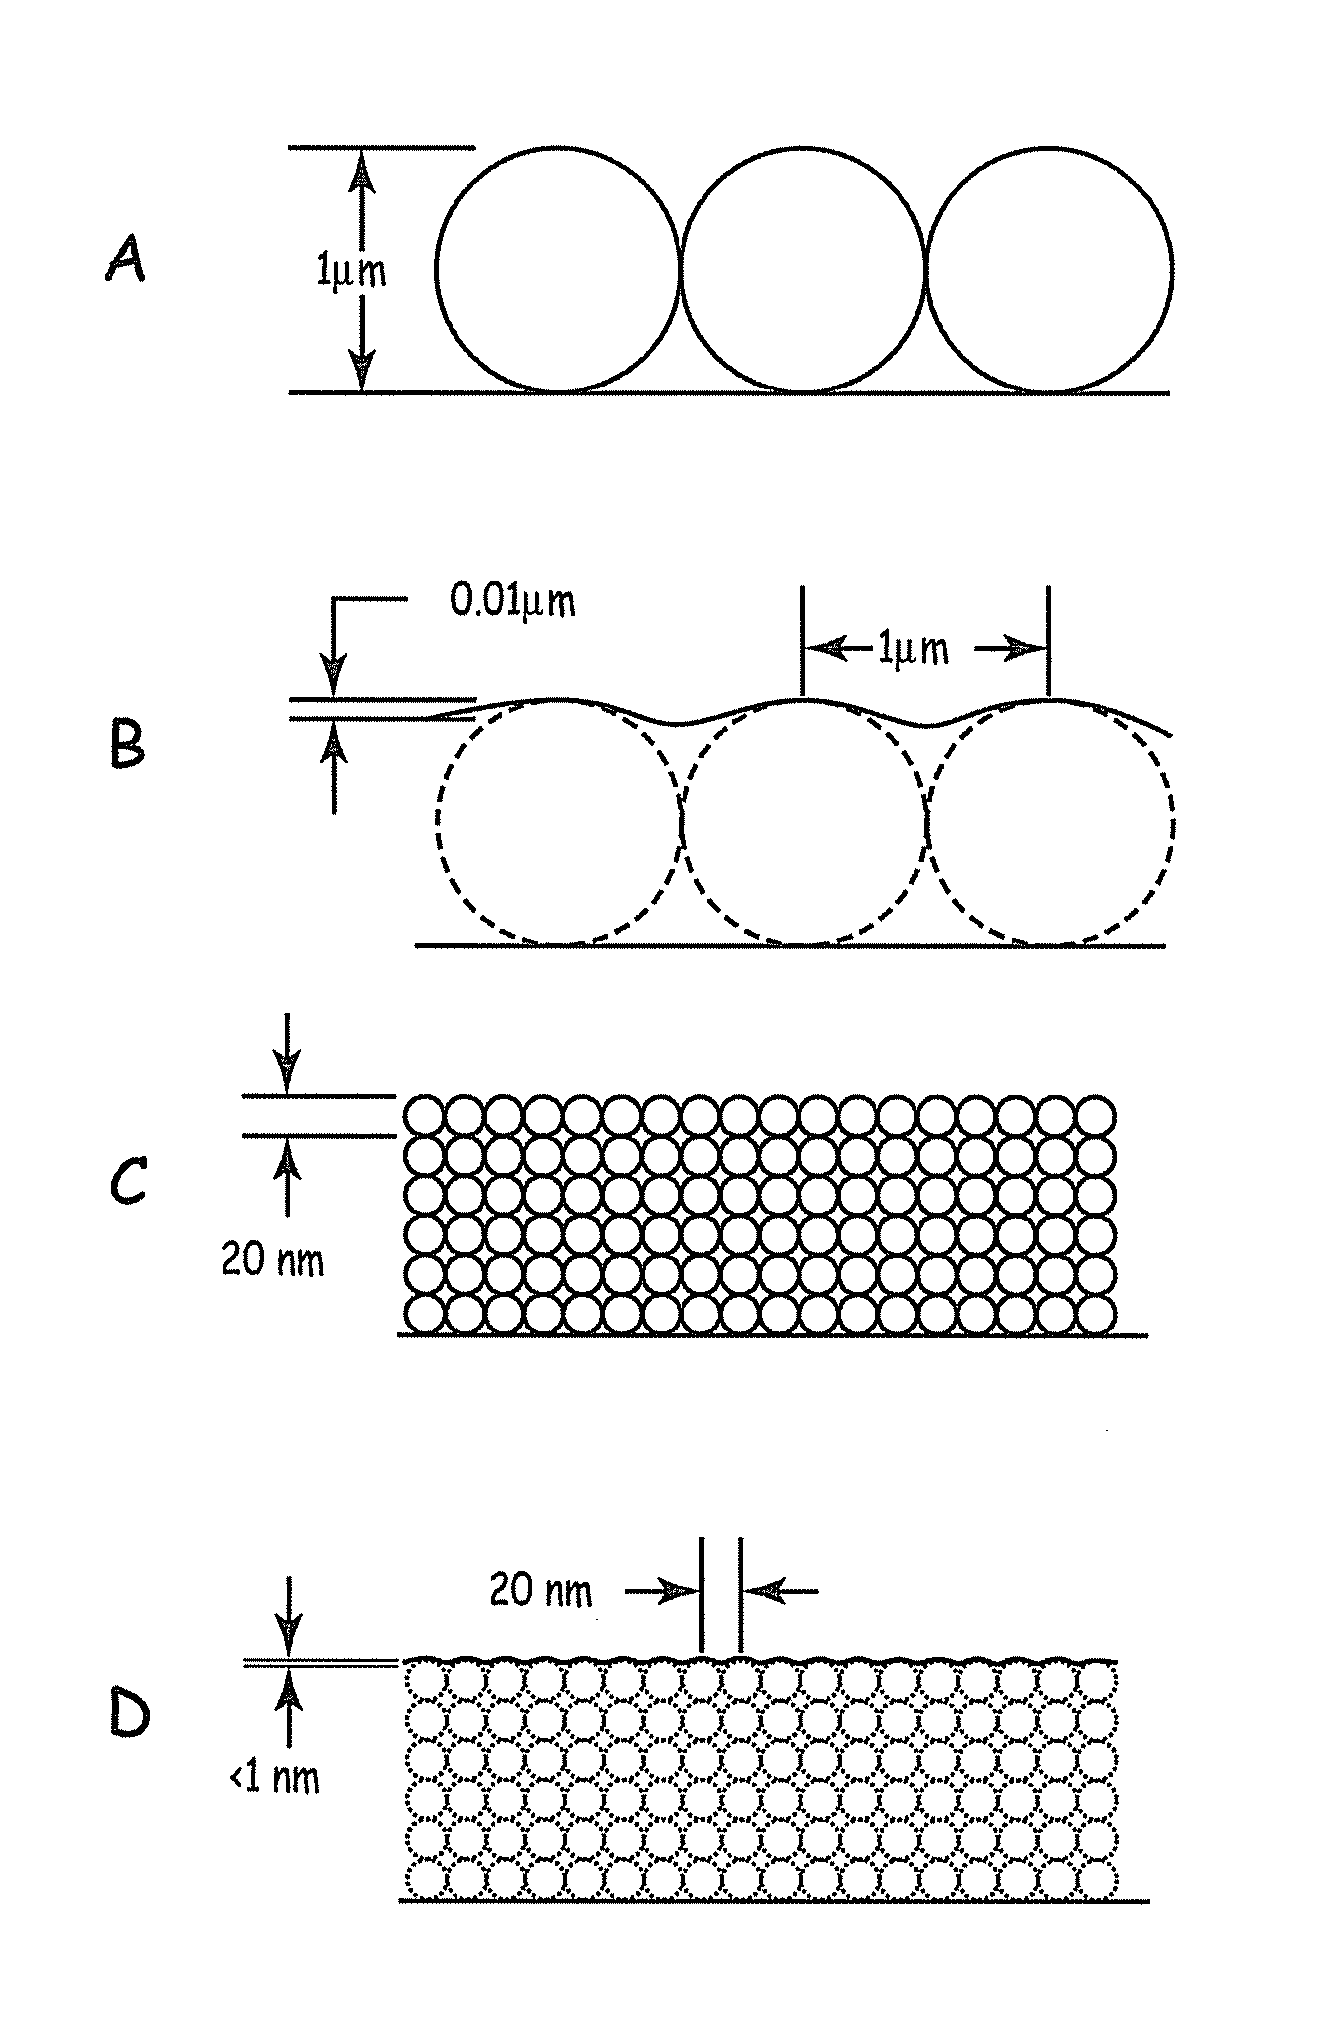 Coating formation by reactive deposition